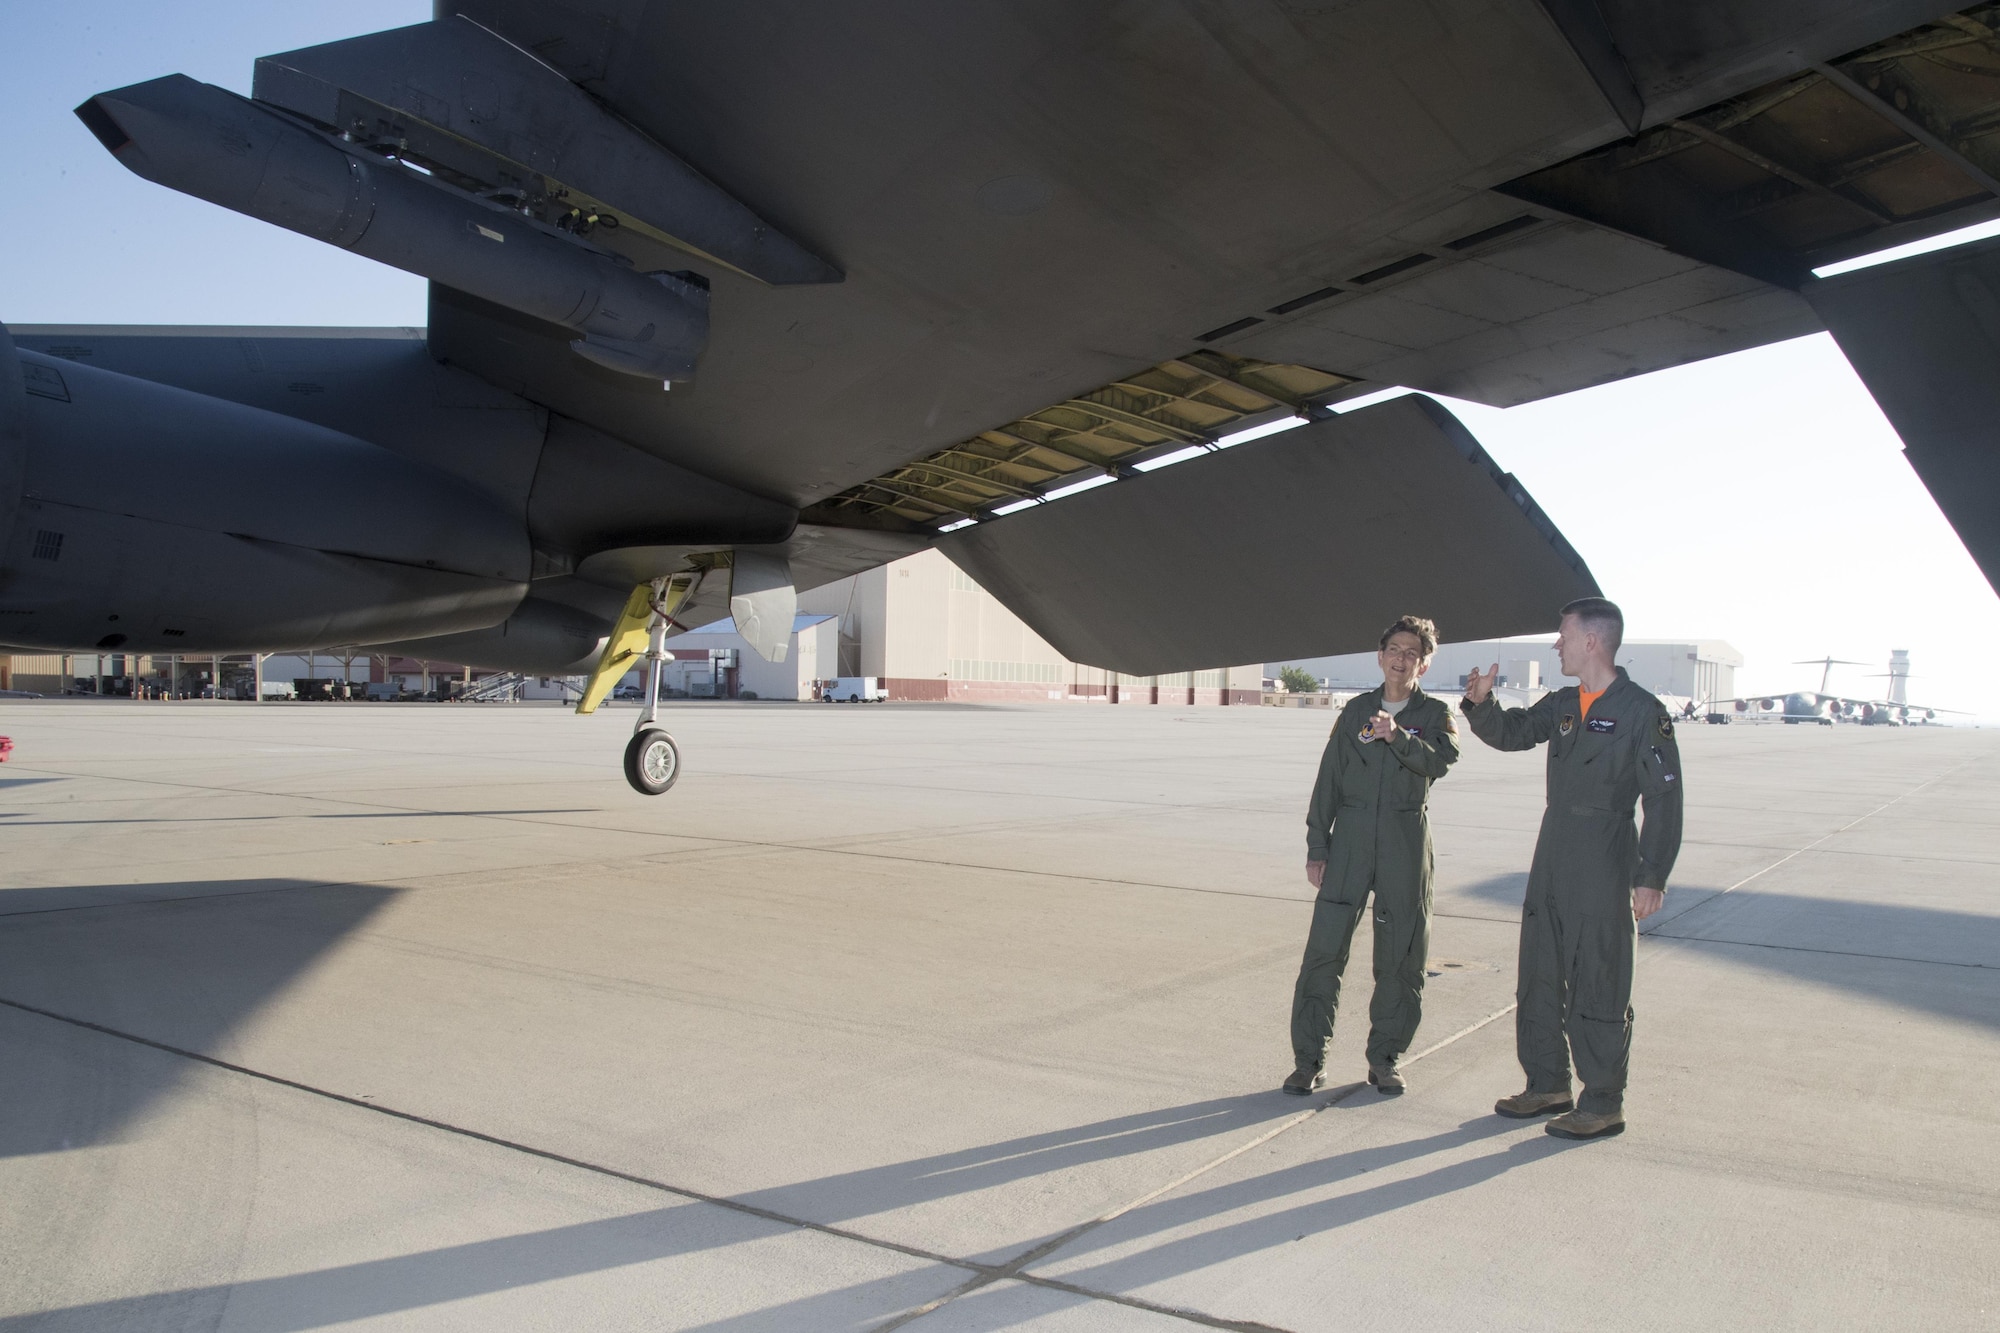 Maj. Timothy Lau, 419th Flight Test Squadron, takes Gen. Ellen Pawlikowski, commander of Air Force Materiel Command, around a B-52 Stratofortress used for flight test missions before taking off on an orientation flight May 12. (U.S. Air Force photo by Christian Turner)